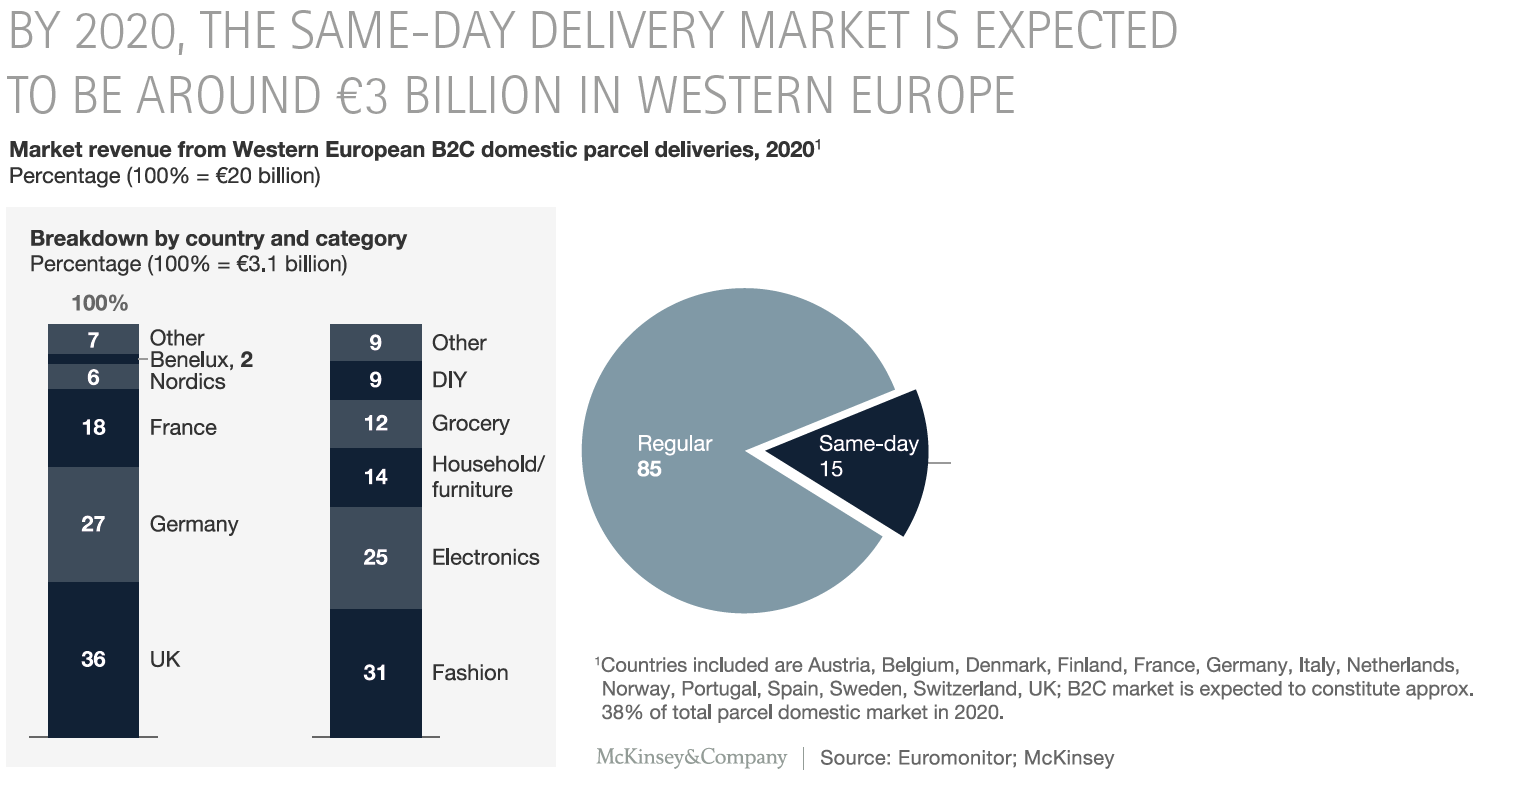 https://orwak.com/wp-content/uploads/2019/11/McKinsey-report_Same-Day-Delivery-by-2020.png